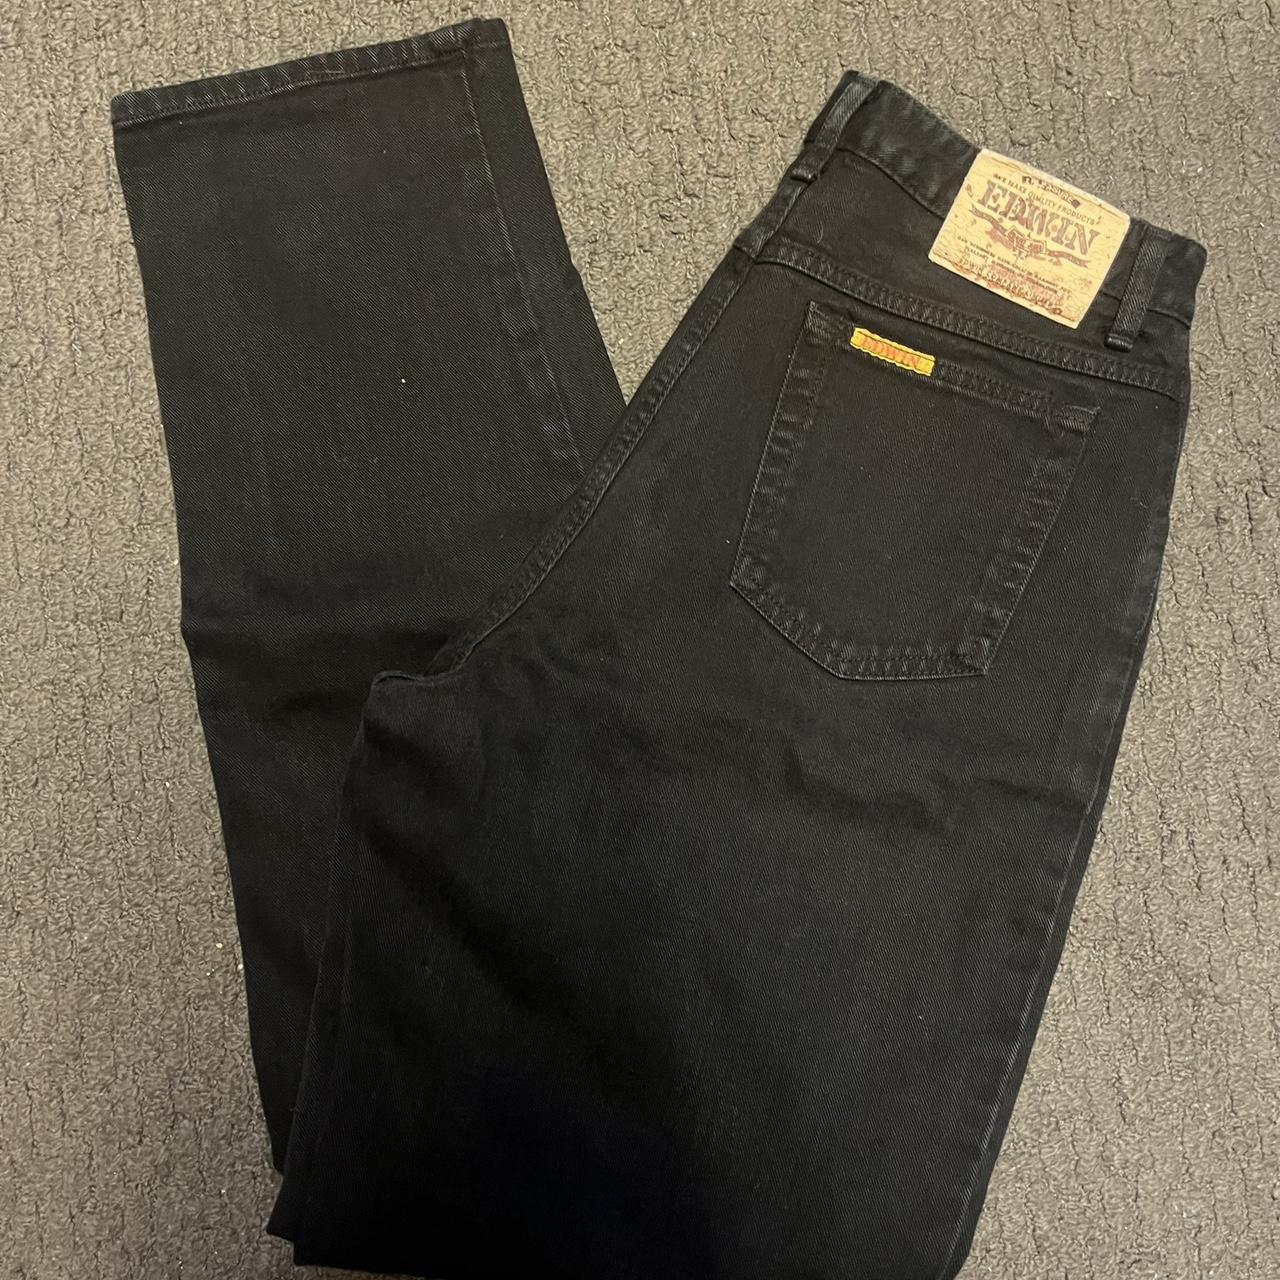 Edwin made in Japan jeans. Sick black color with... - Depop